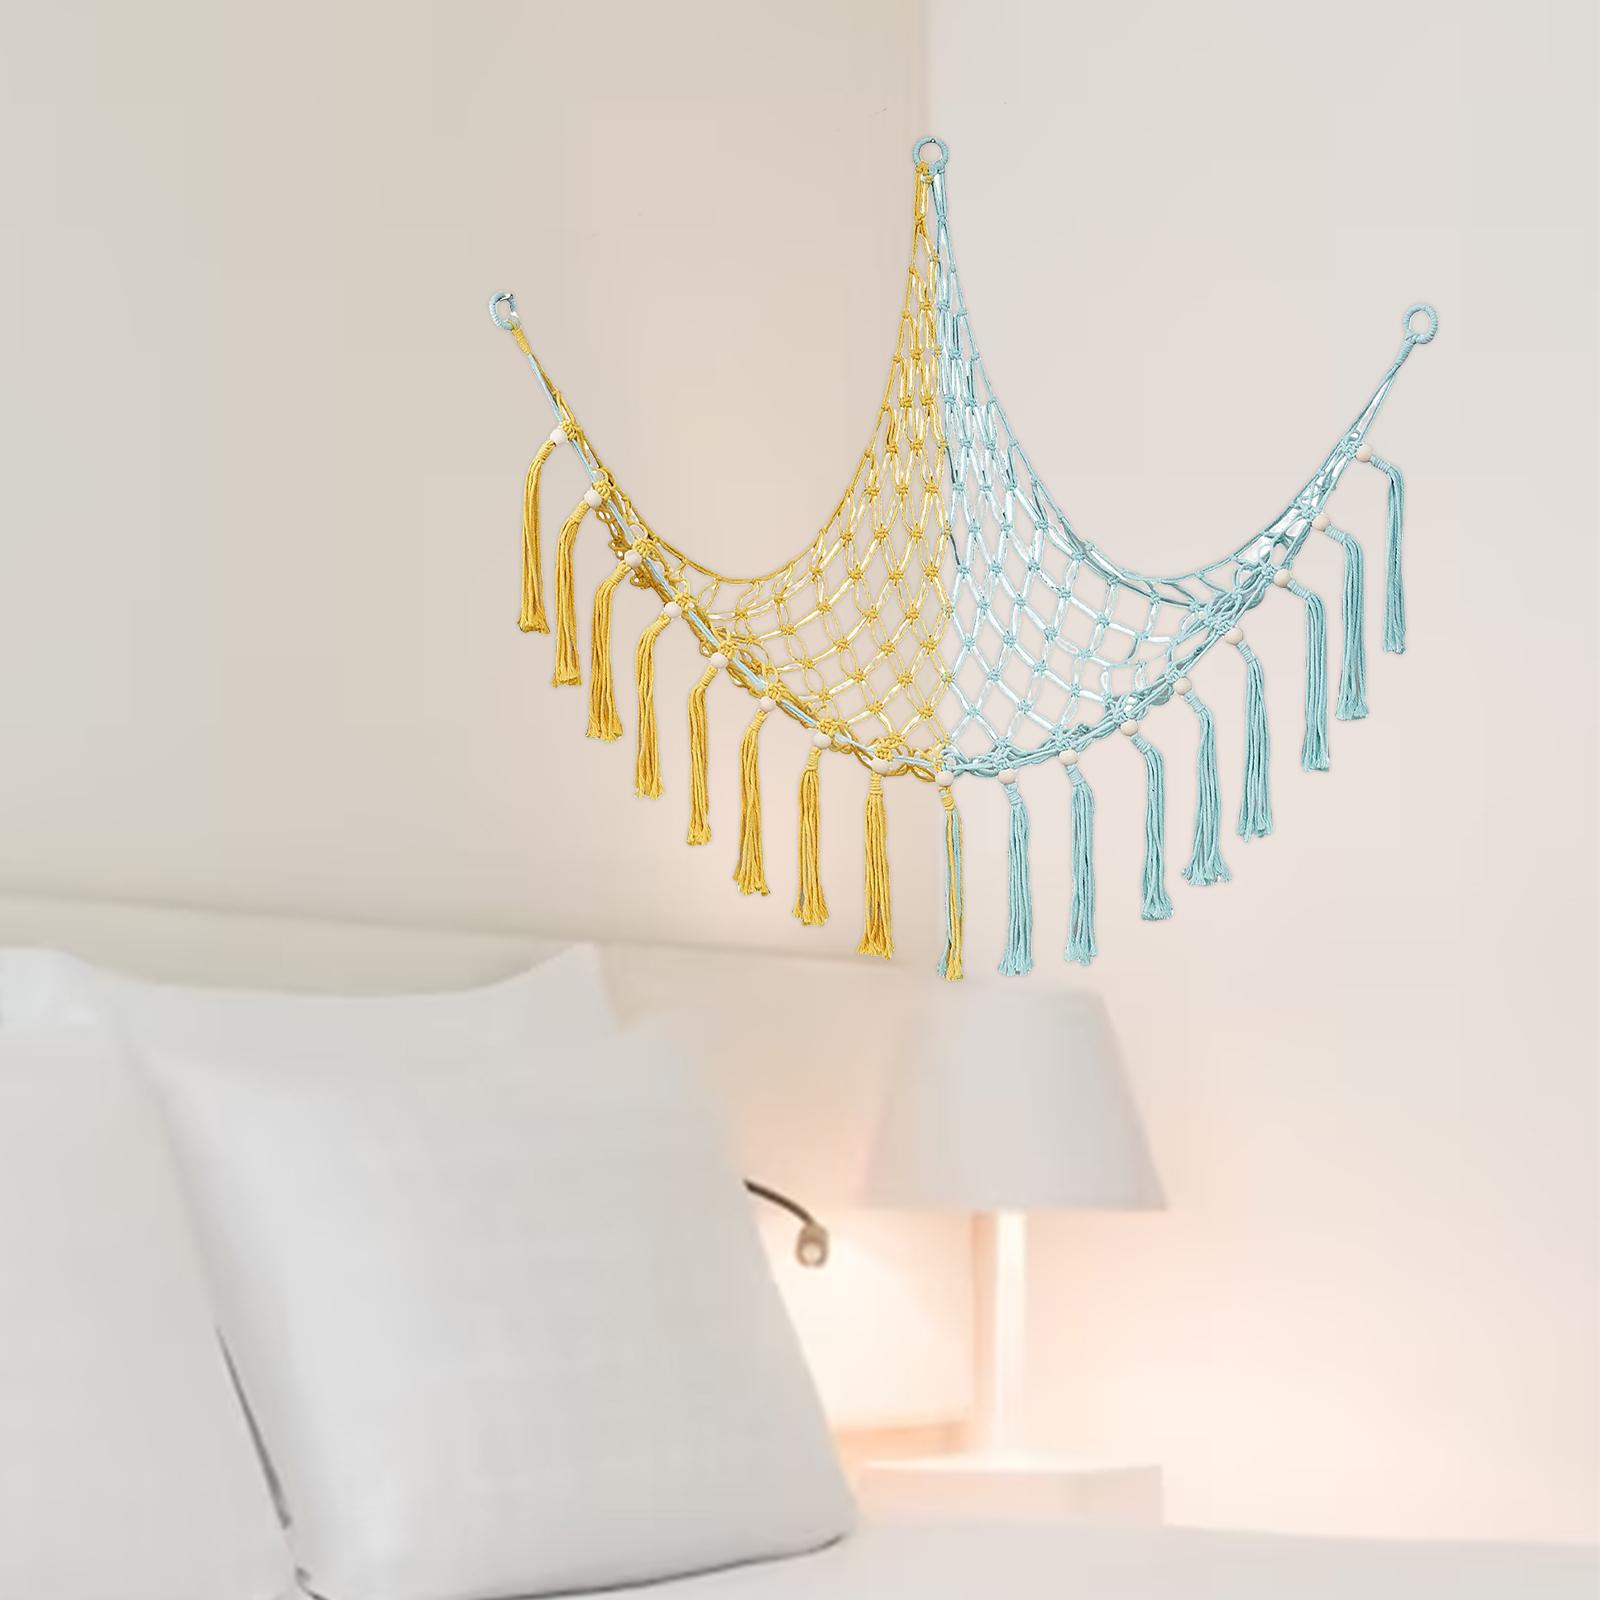 Creative Toy Hammock Wall Mounted Children Toy Holder with Tassels Decor 100cmx100cmx130cm Yellow and Blue